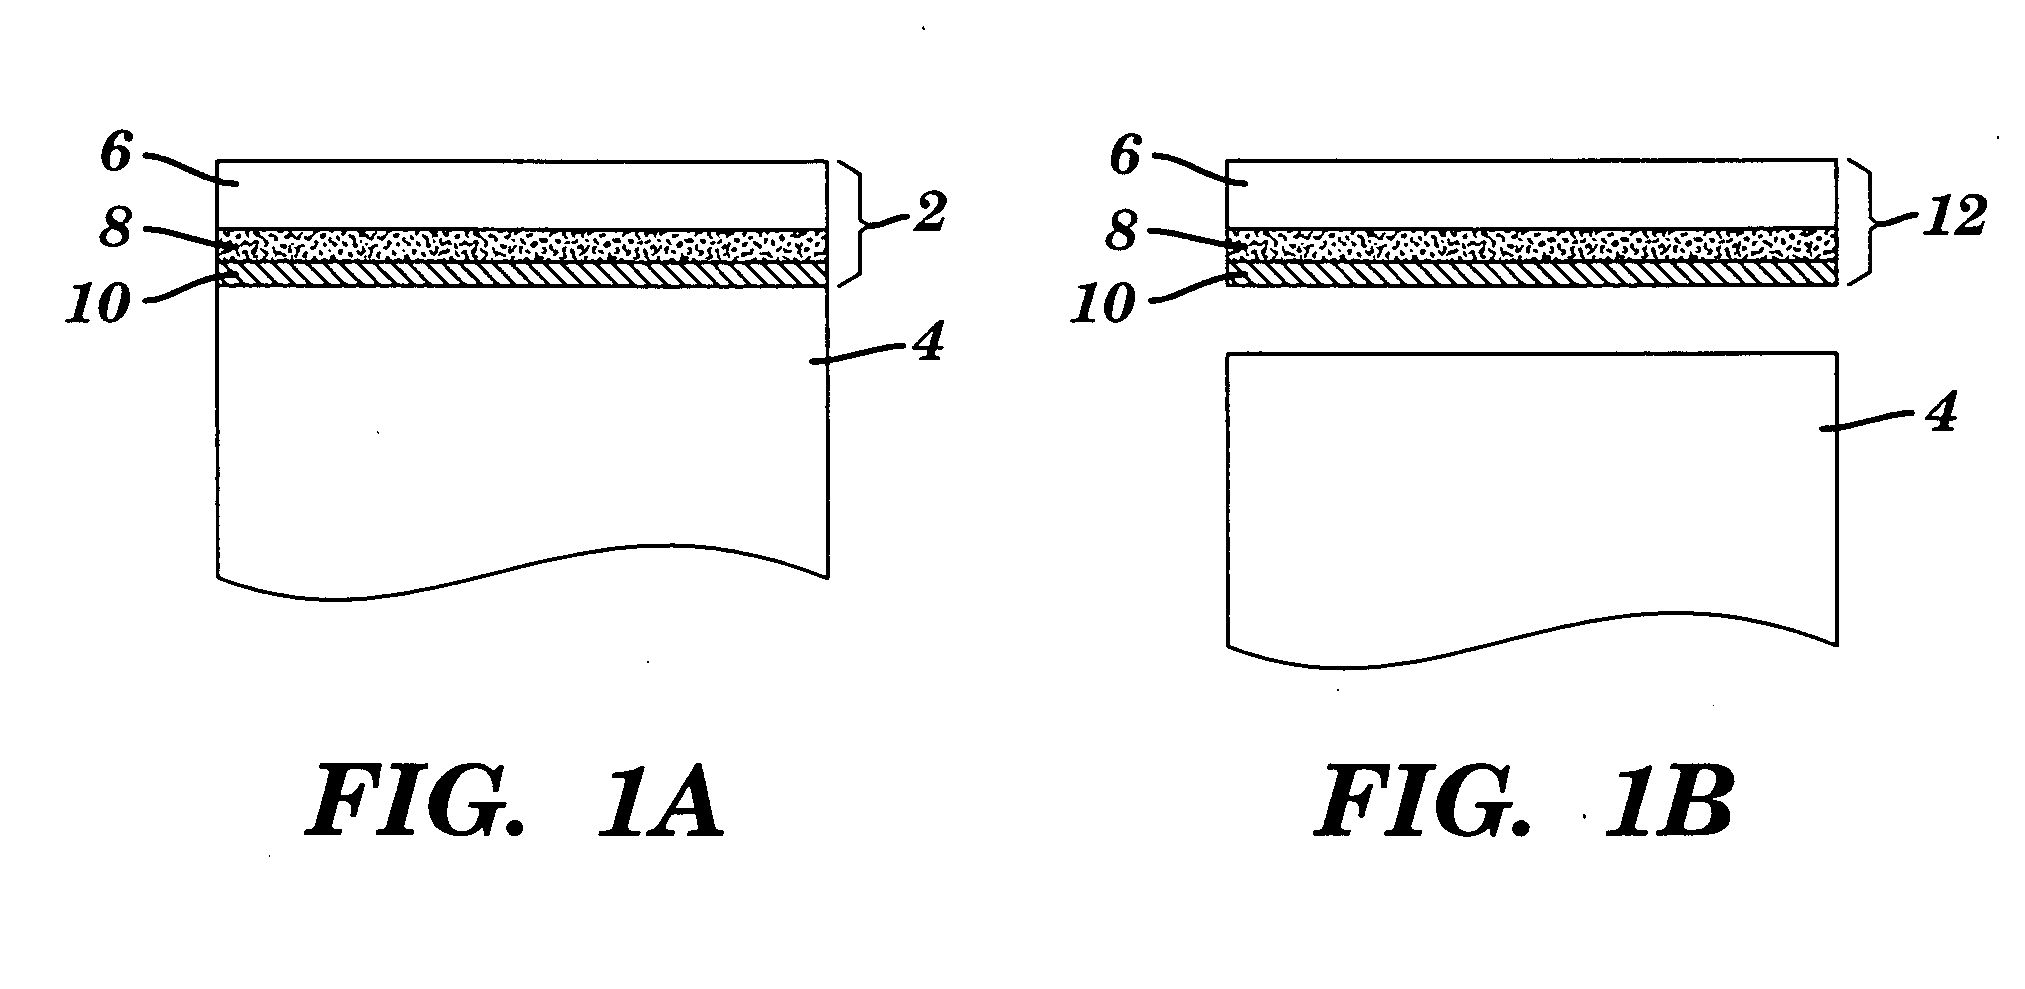 Methods and materials for reducing damage from environmental electromagnetic effects